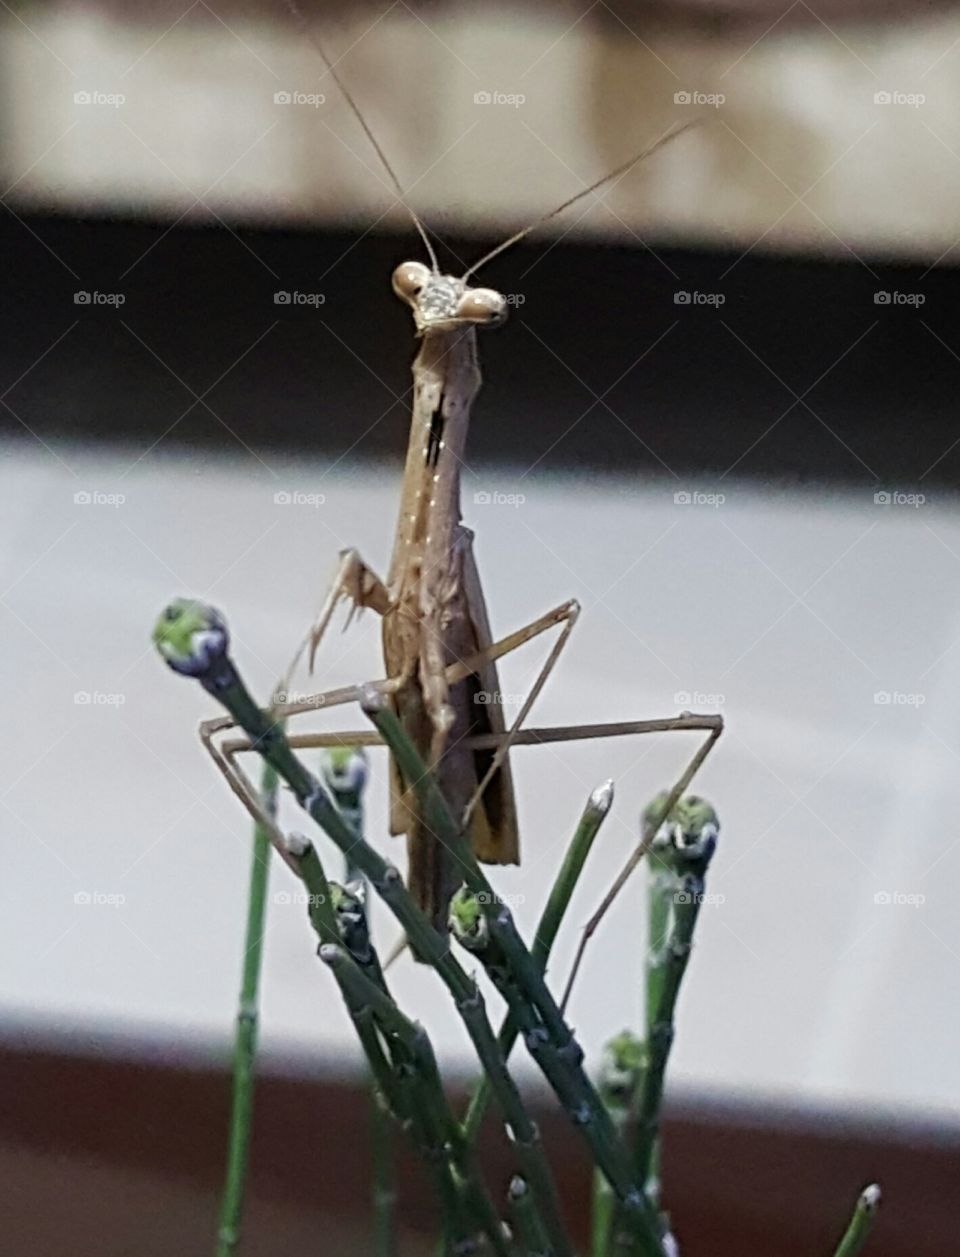 Mantis perched on a plant, looking at the photographer.